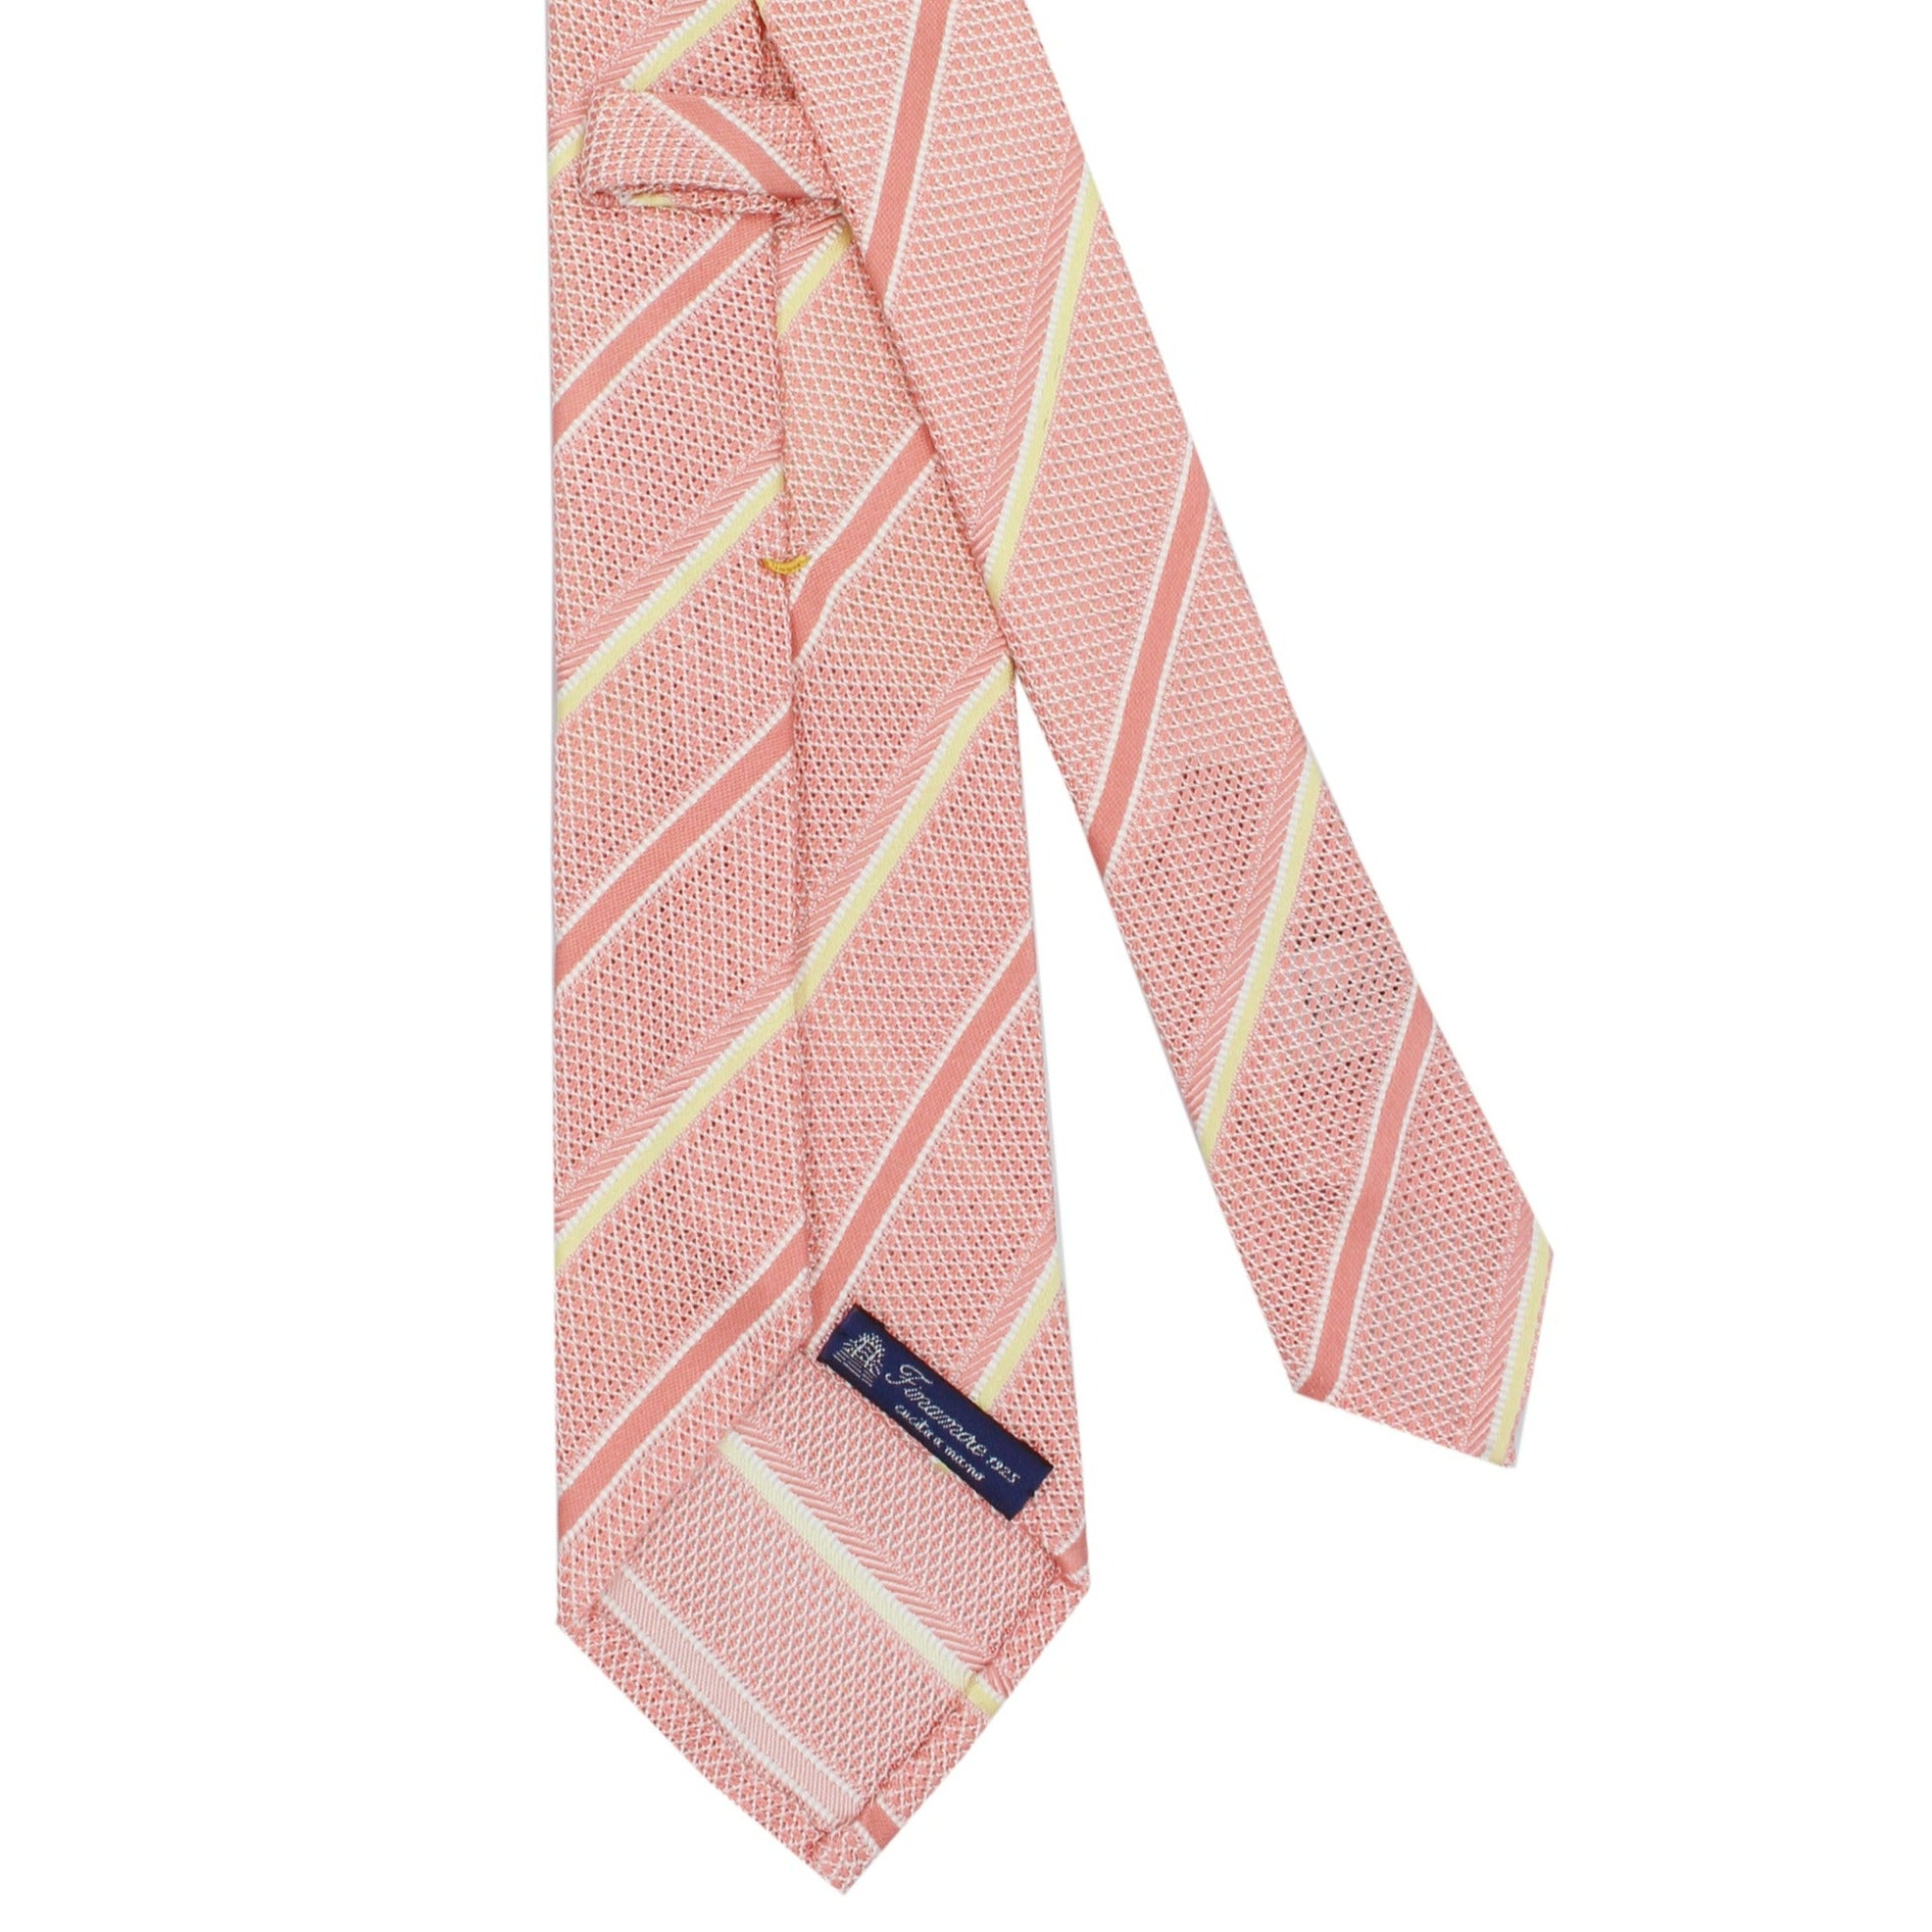 Anversa silk tie, pink background with yellow, white and pink stripes